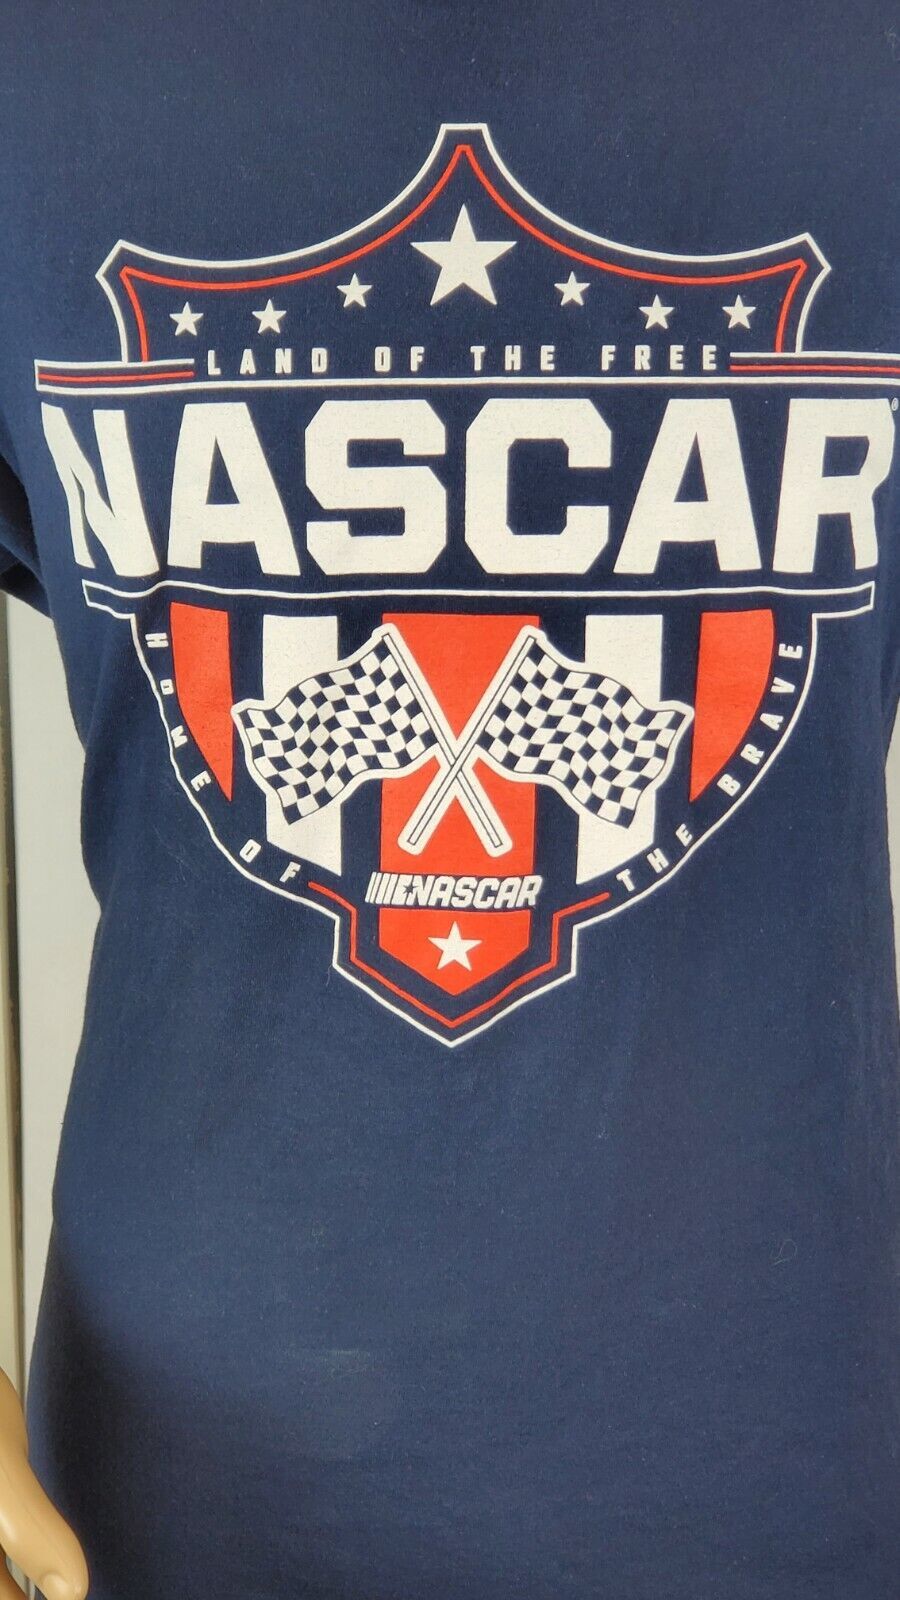 Primary image for Nascar. Men's XL T-shirt. Land Of The Free.  Blue